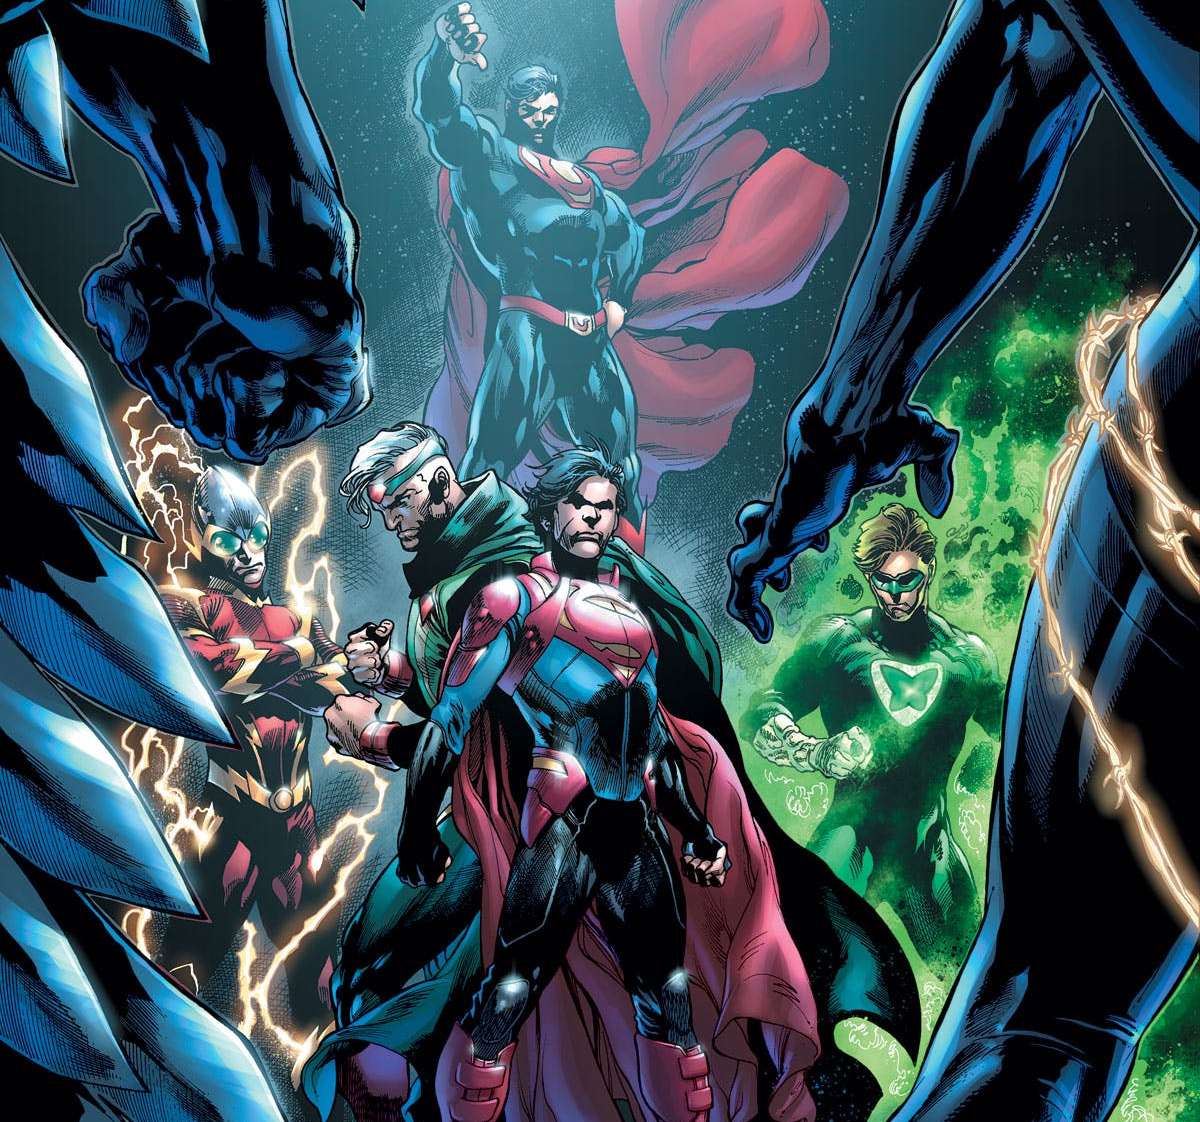 Superman #9 review: The Ultraman and the vision